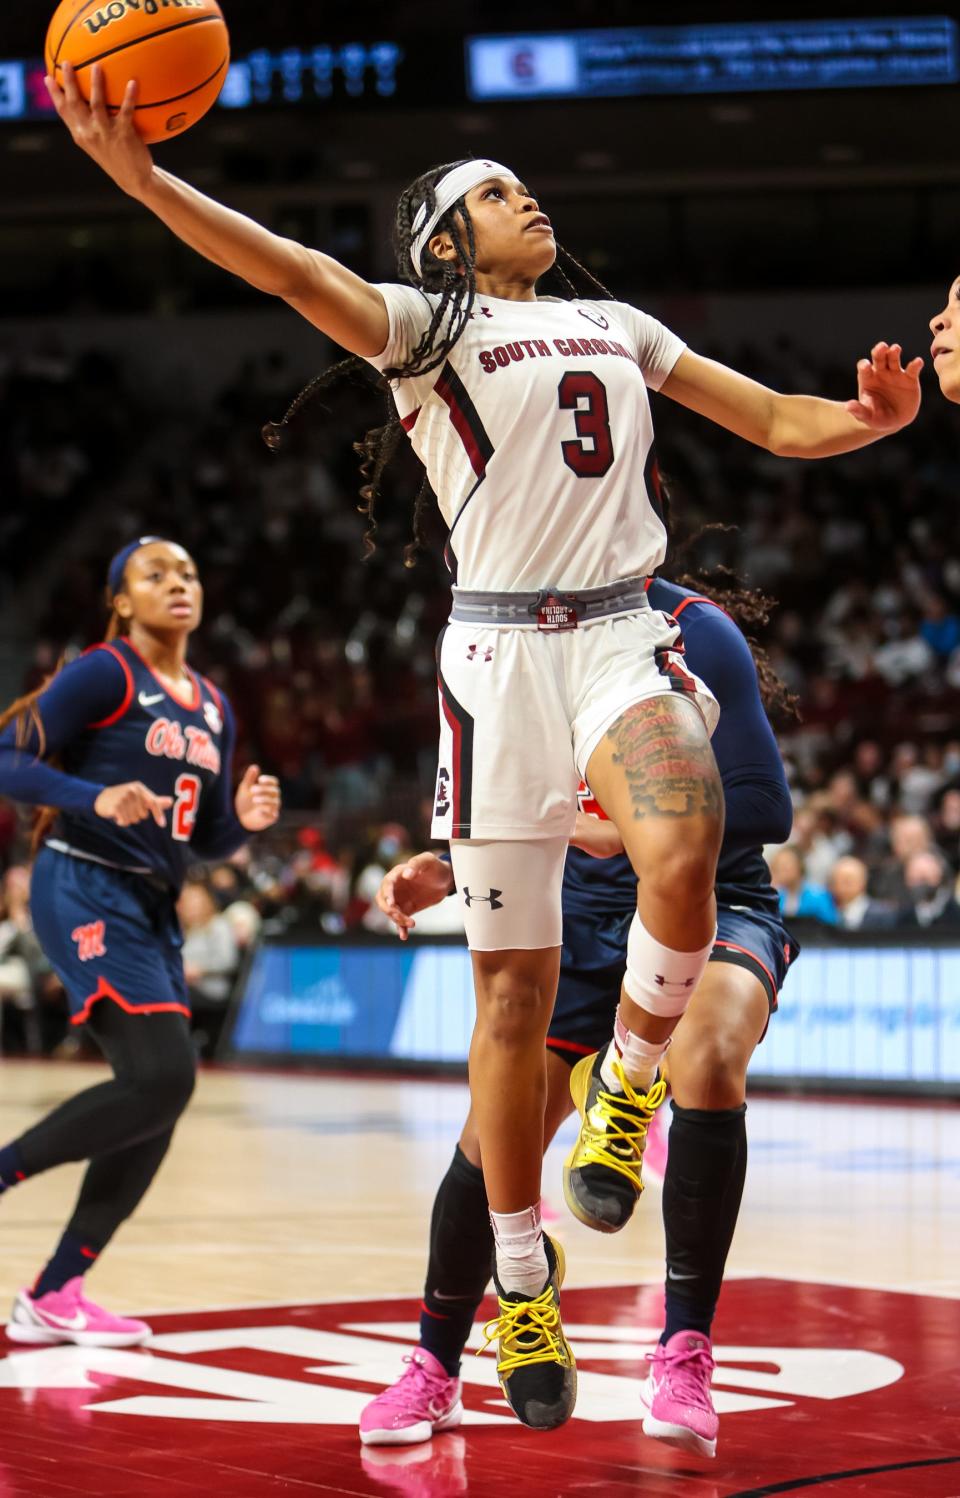 Jan 27, 2022; Columbia, South Carolina, USA; South Carolina Gamecocks guard Destanni Henderson (3) shoots against the Ole Miss Rebels in the second half at Colonial Life Arena. Mandatory Credit: Jeff Blake-USA TODAY Sports